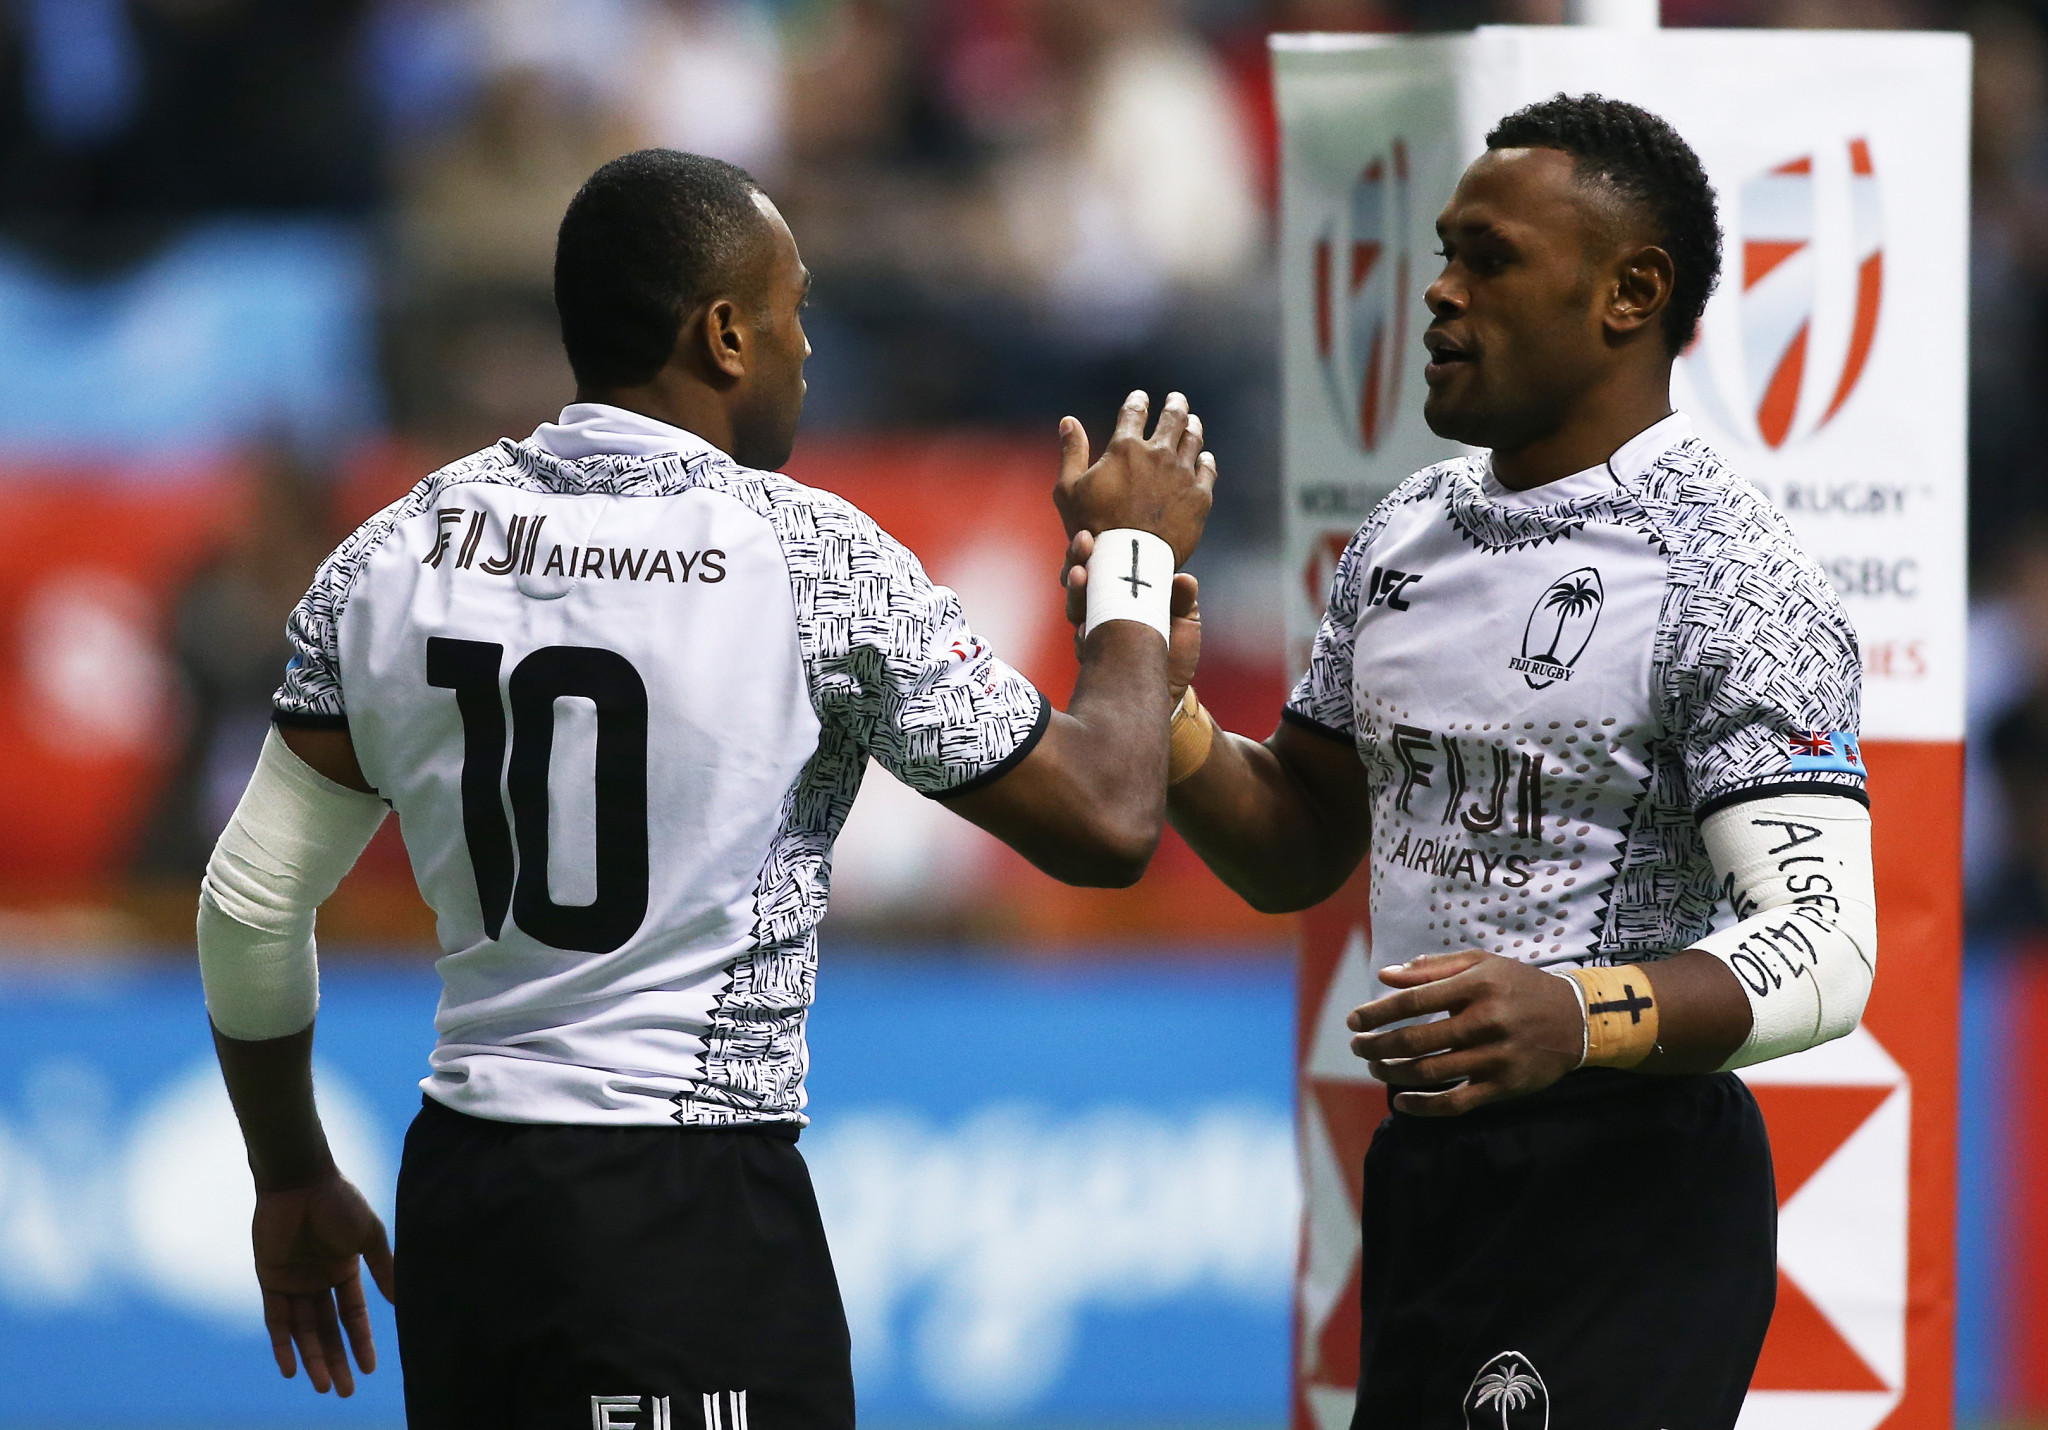 Fiji will hope to continue their good form in Hong Kong ©Getty Images